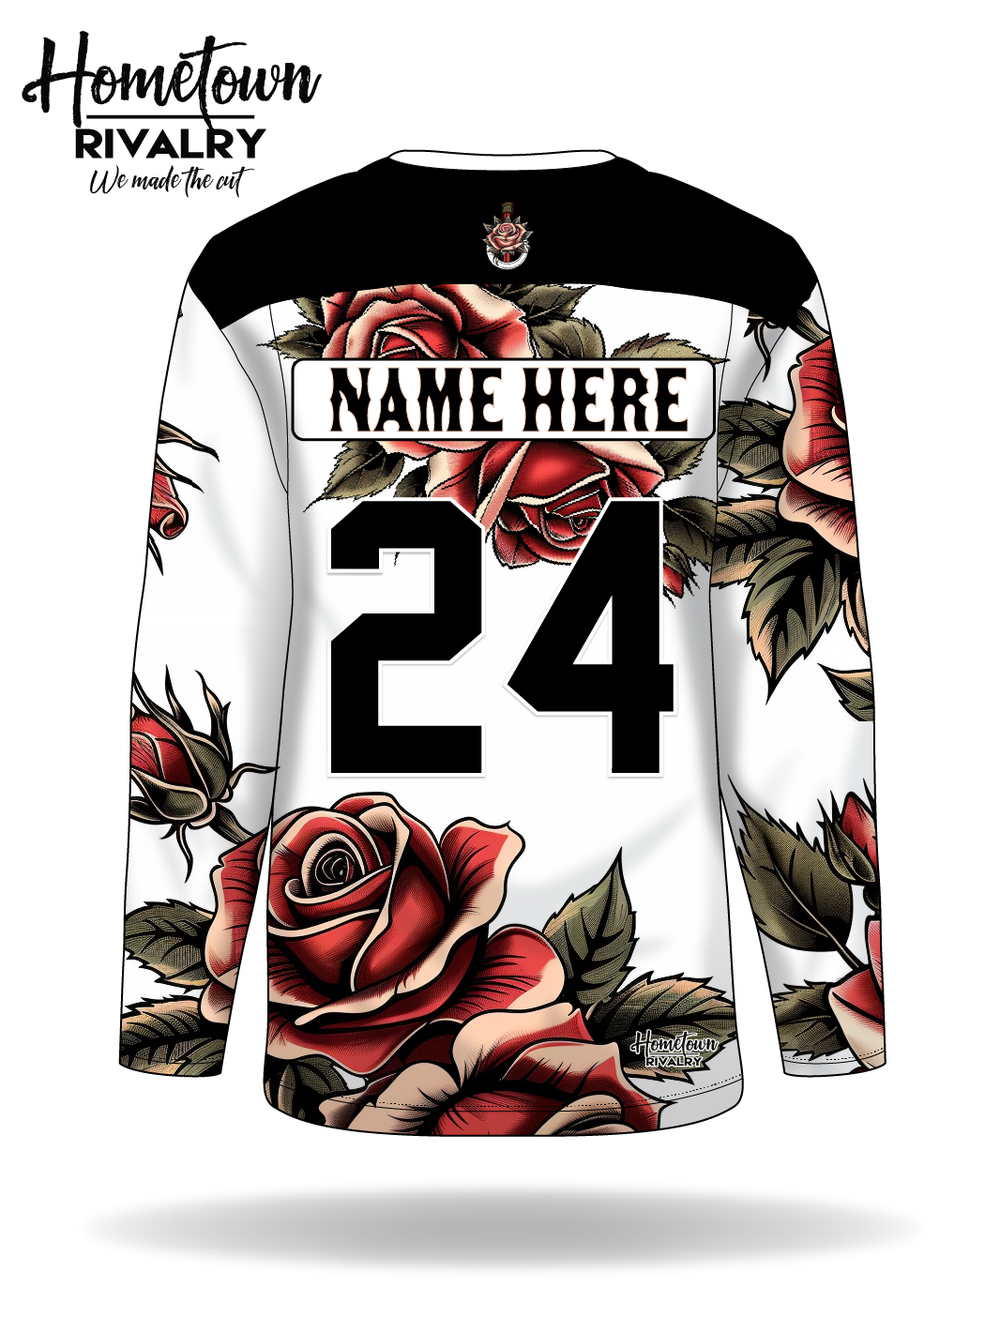 RTO Team Jerseys-Rings and Roses